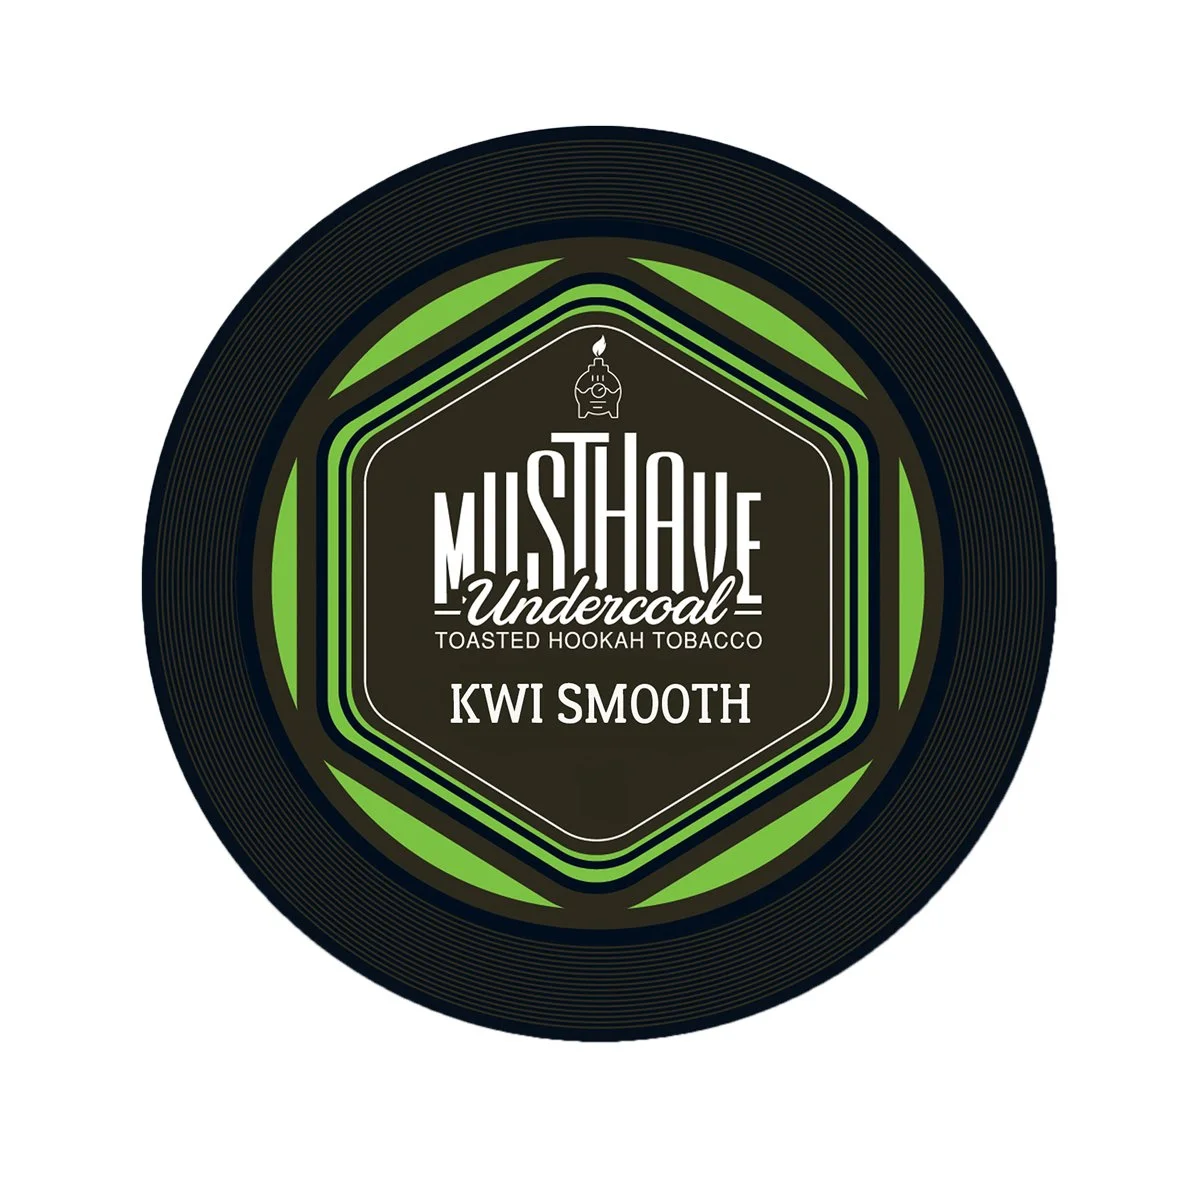 Musthave | Kiwi Smooth | 25g